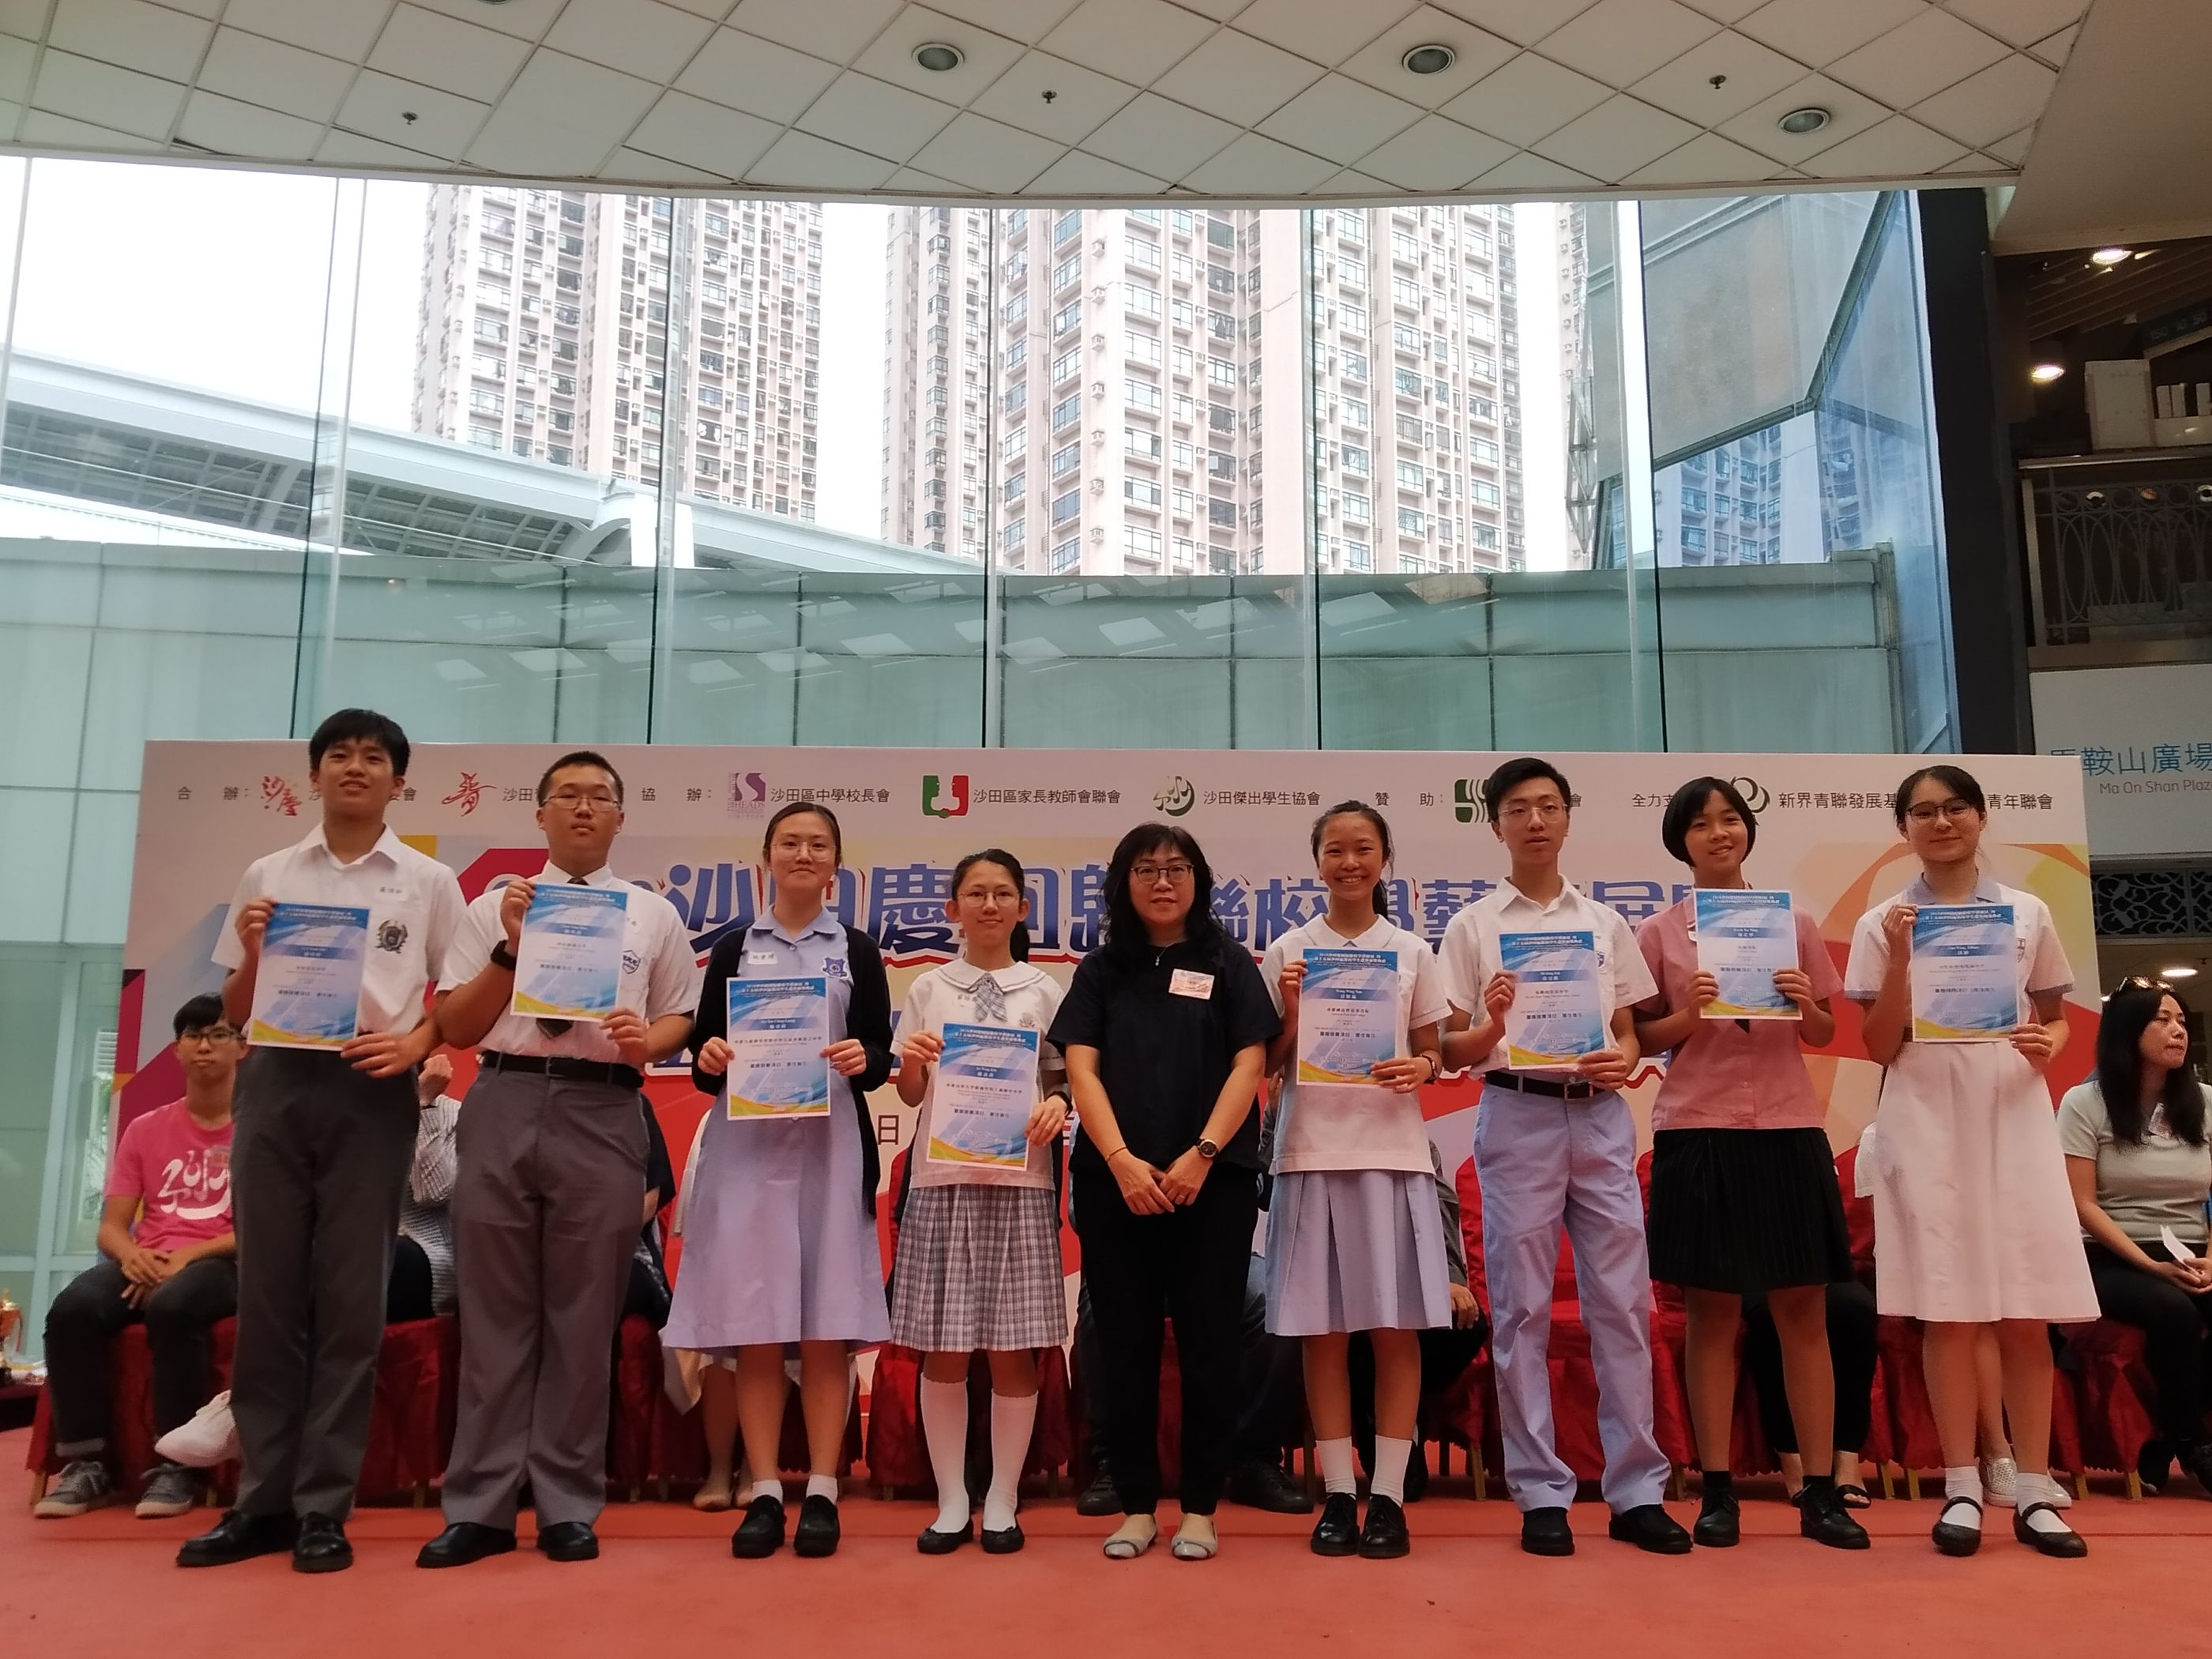 Encouraging Result in the Sha Tin Outstanding Student Election 2019